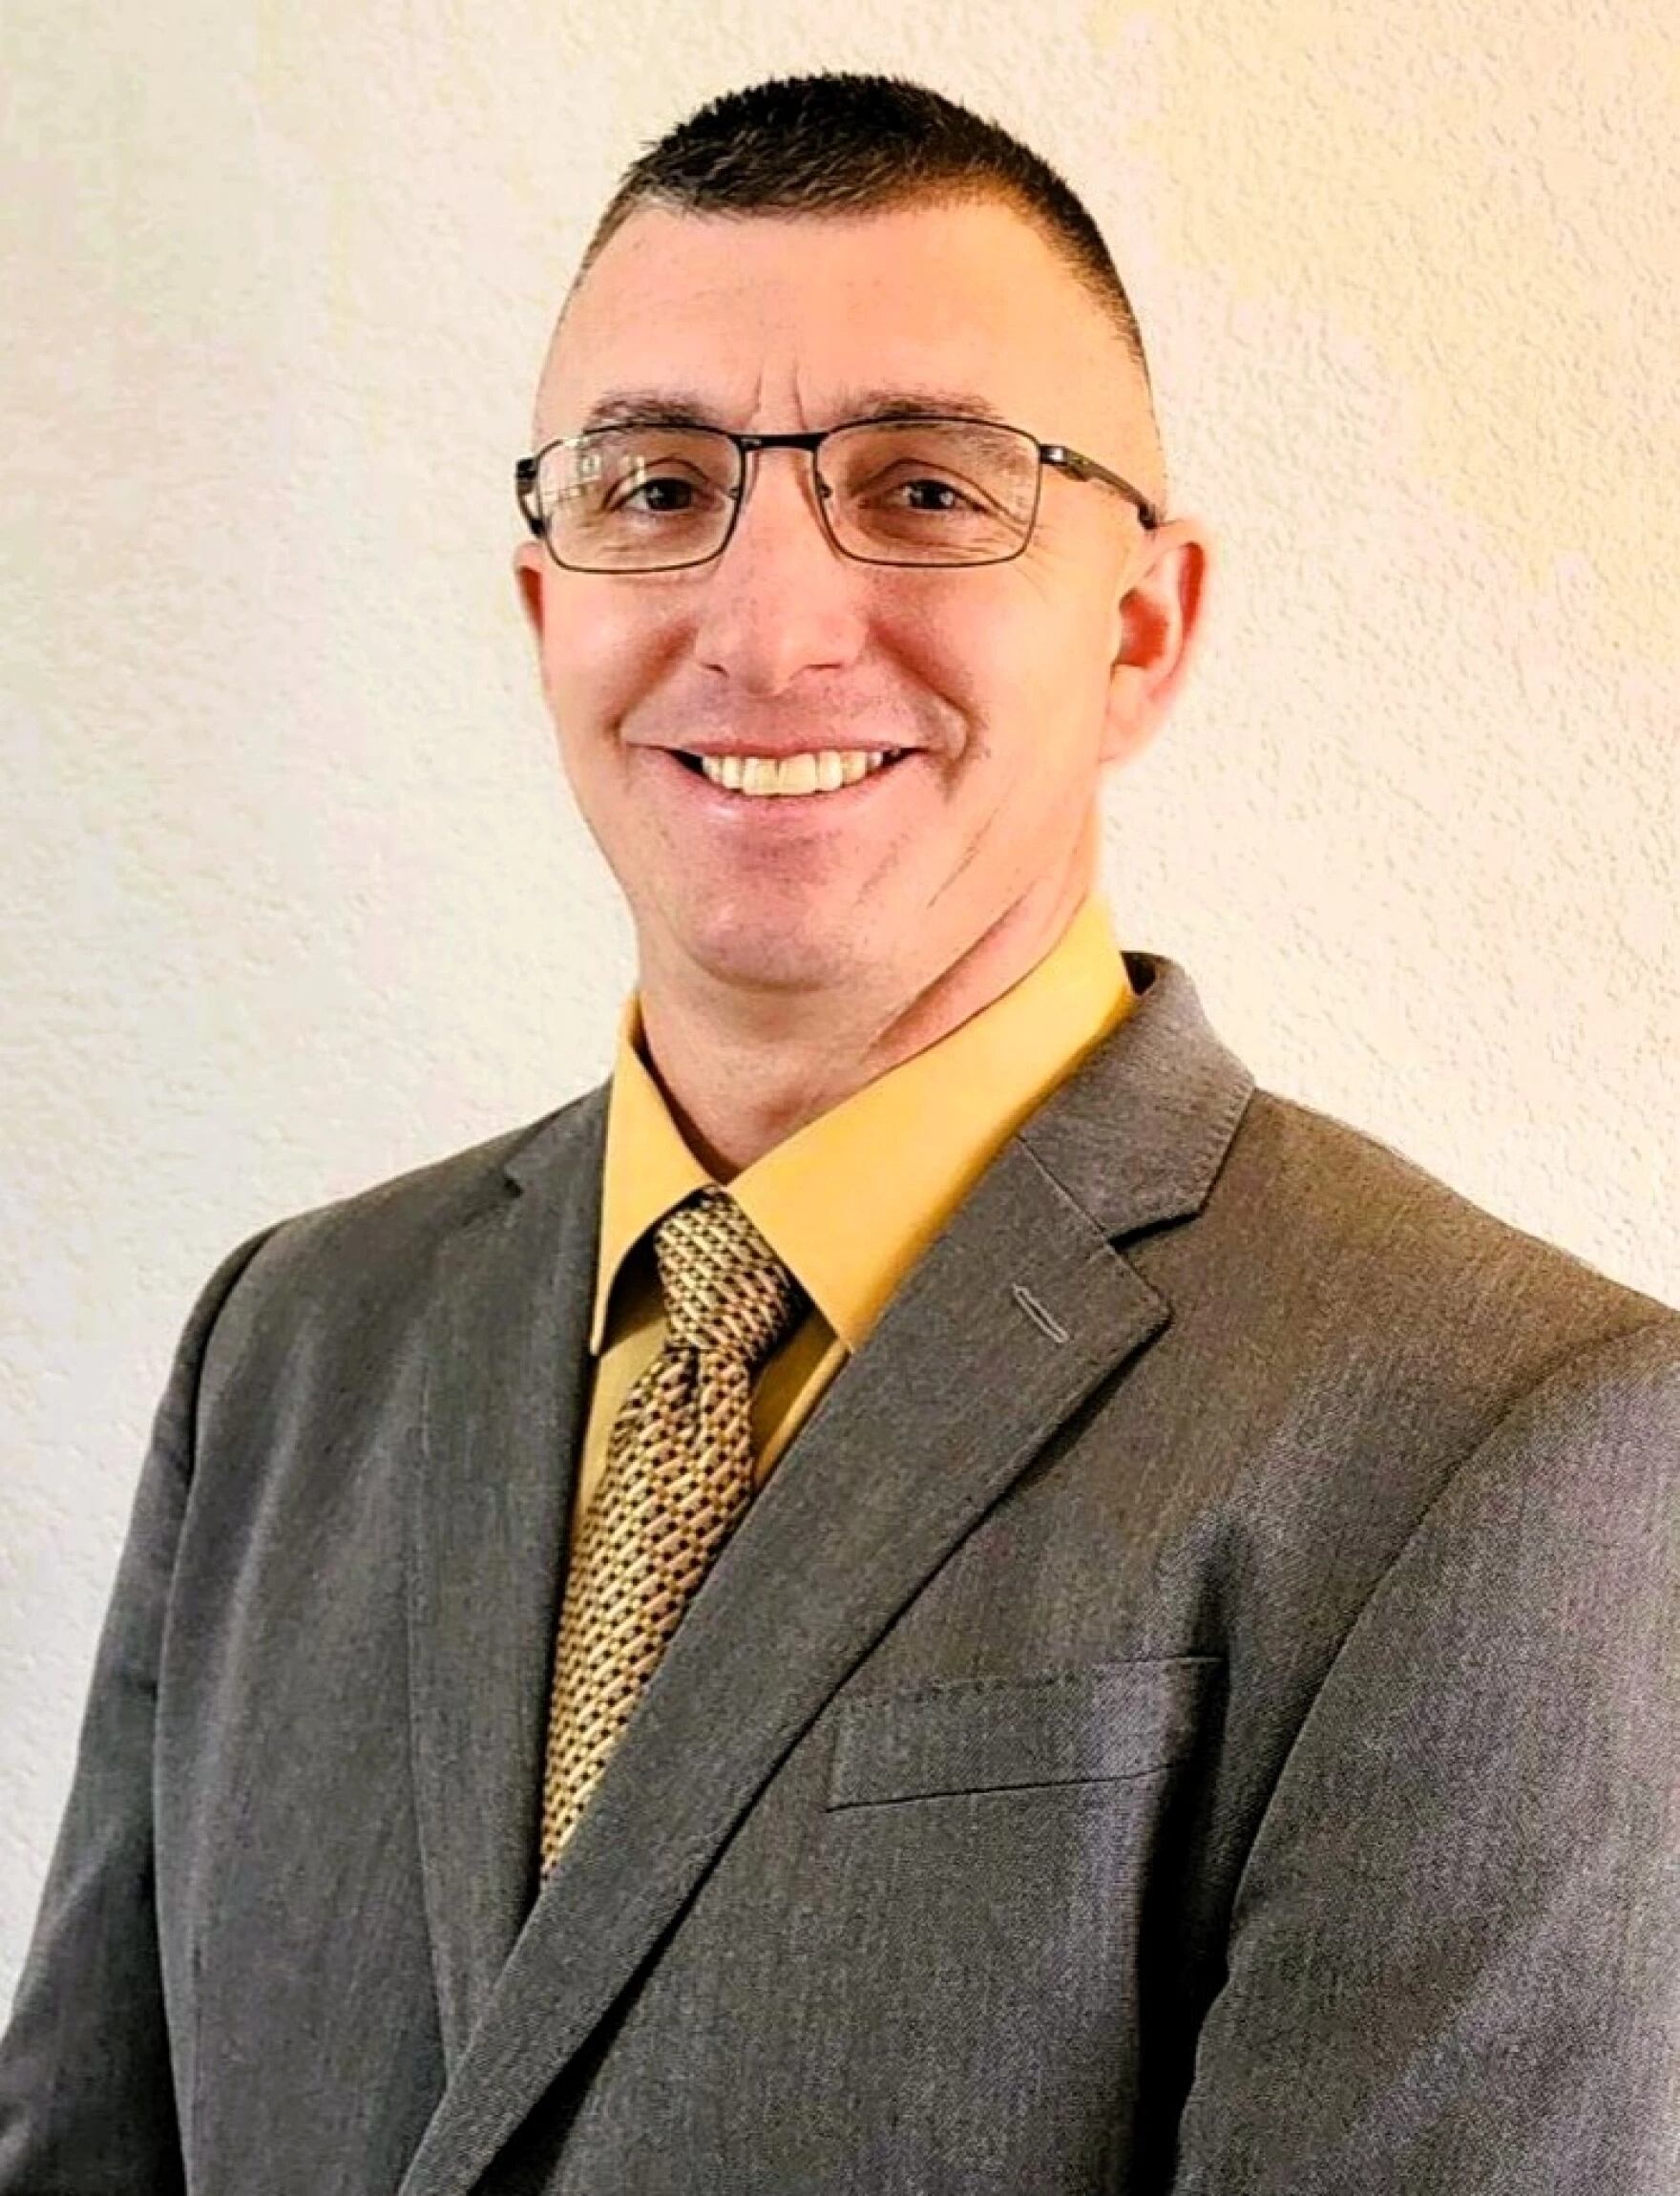 Sheriff's Sgt. Ryan Kaber, currently running for sheriff in Klamath County